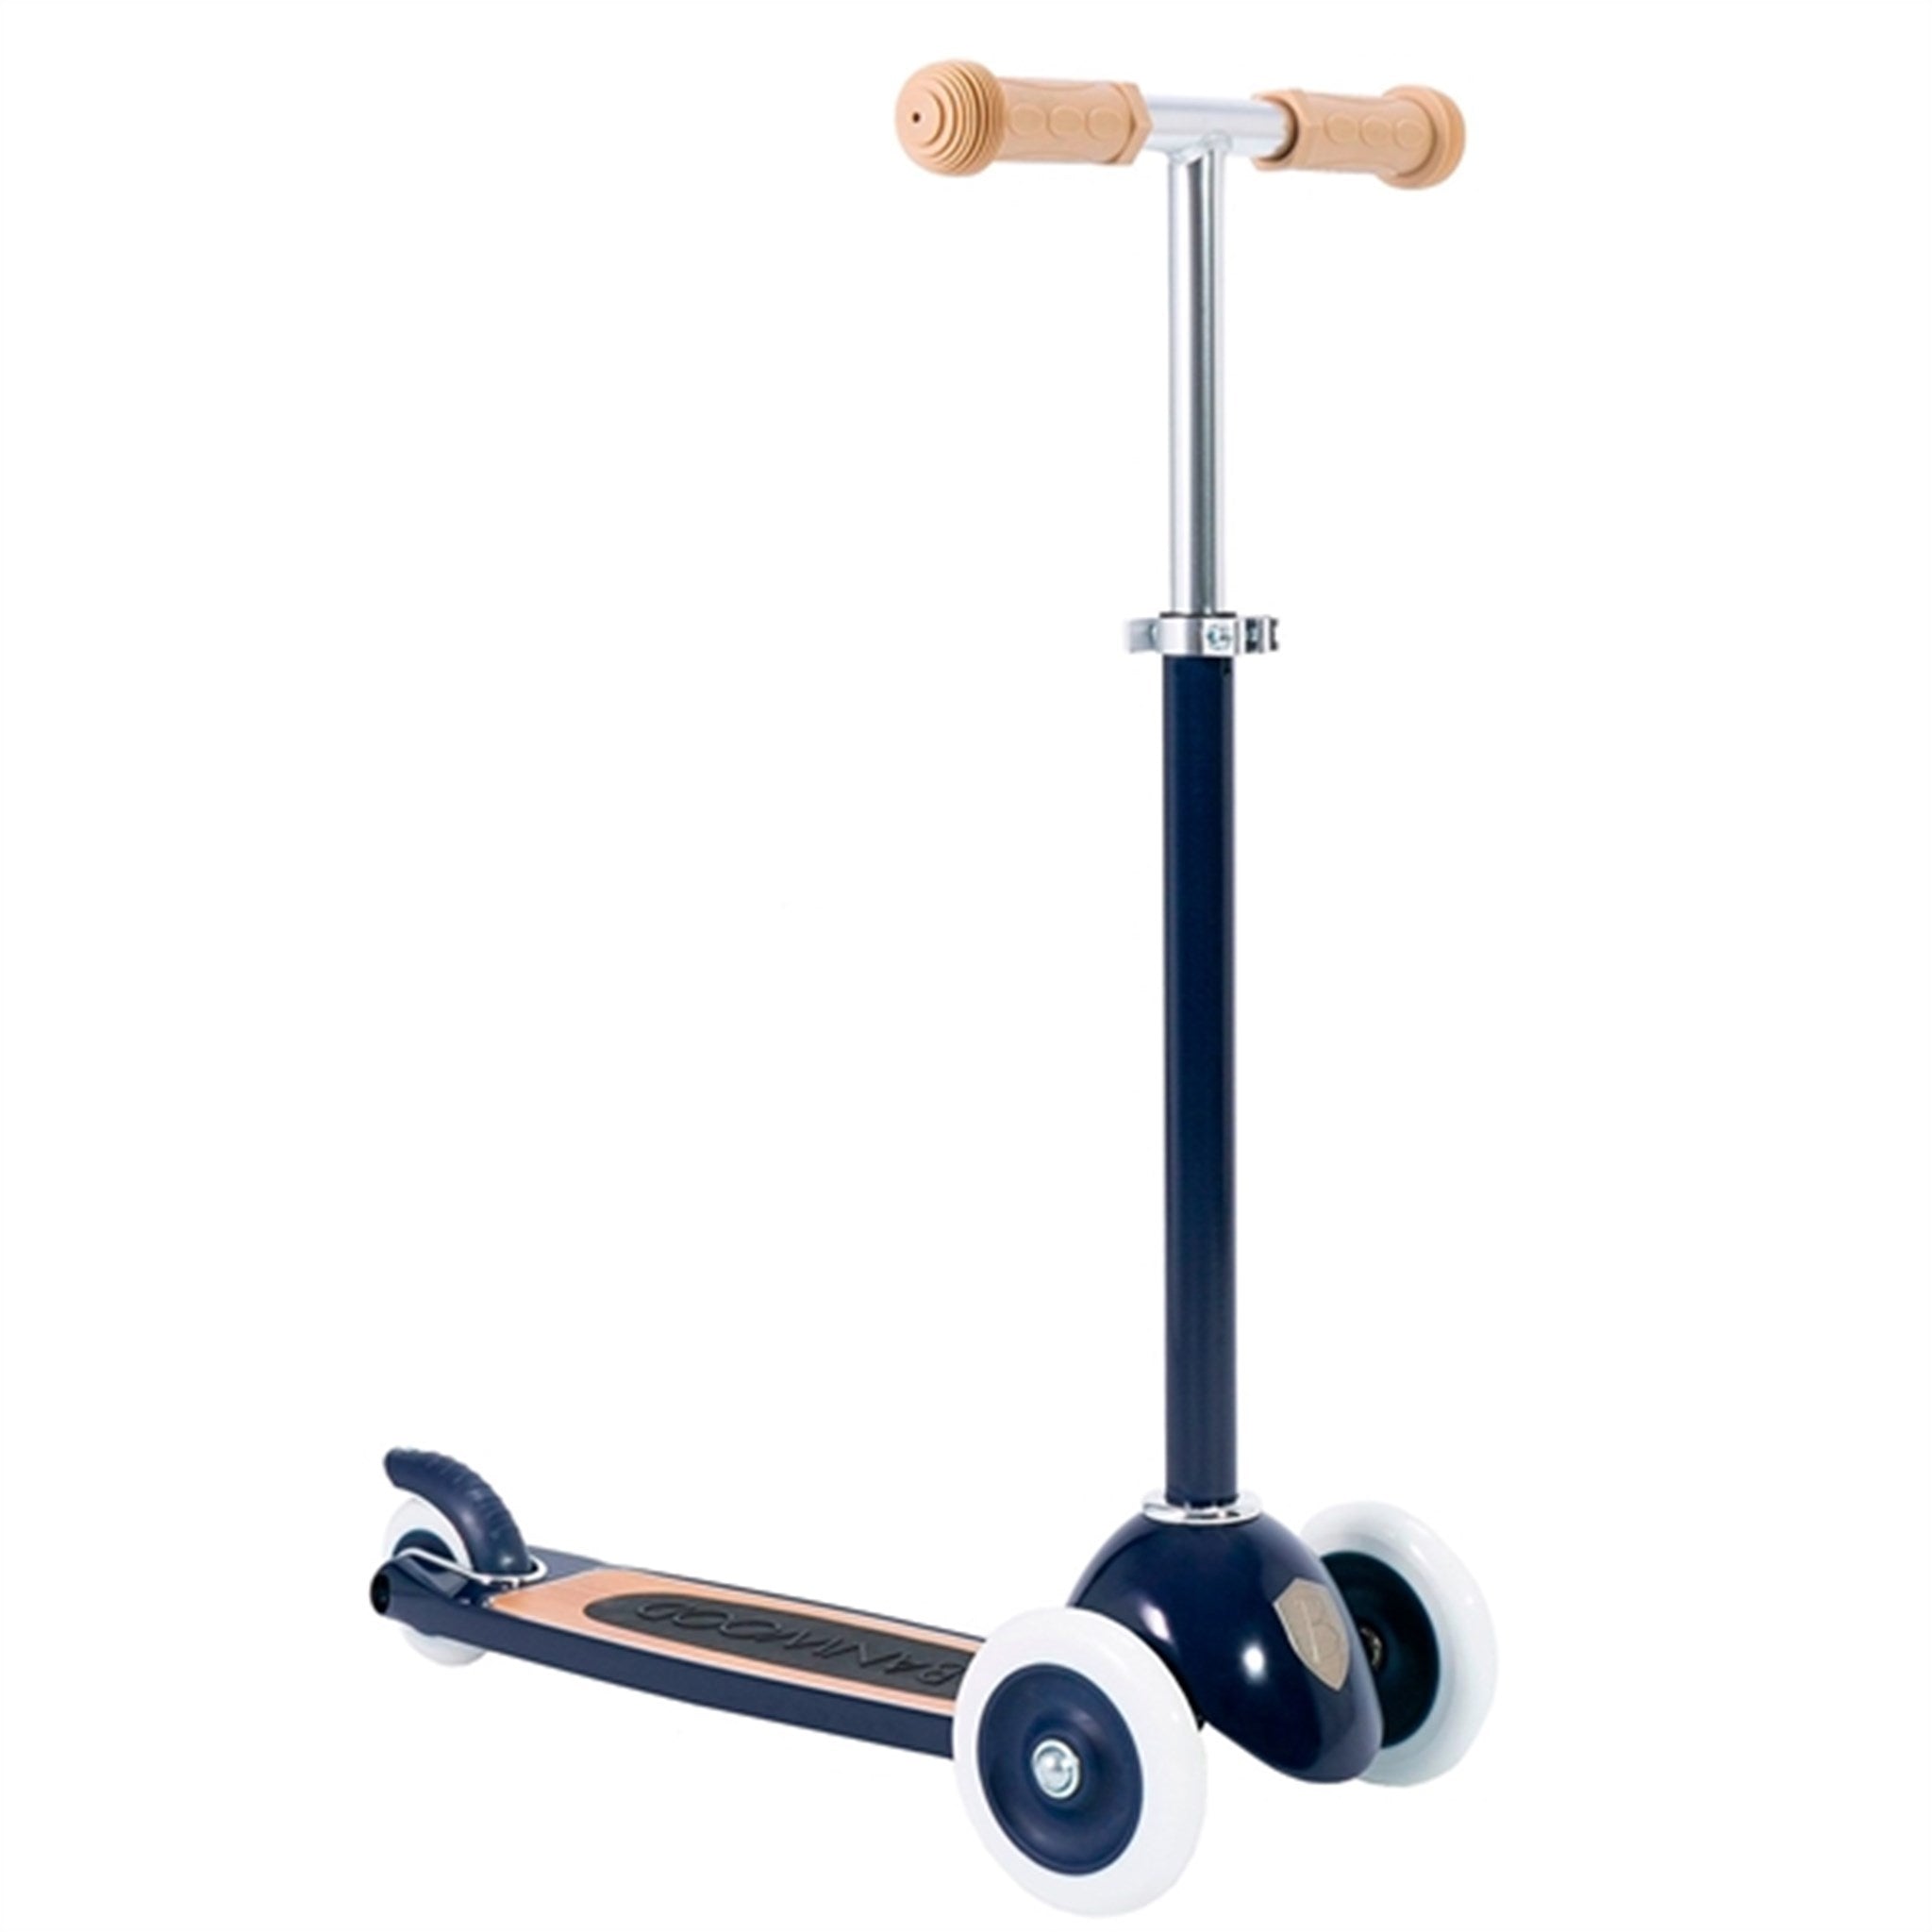 Banwood Scooter Navy 8